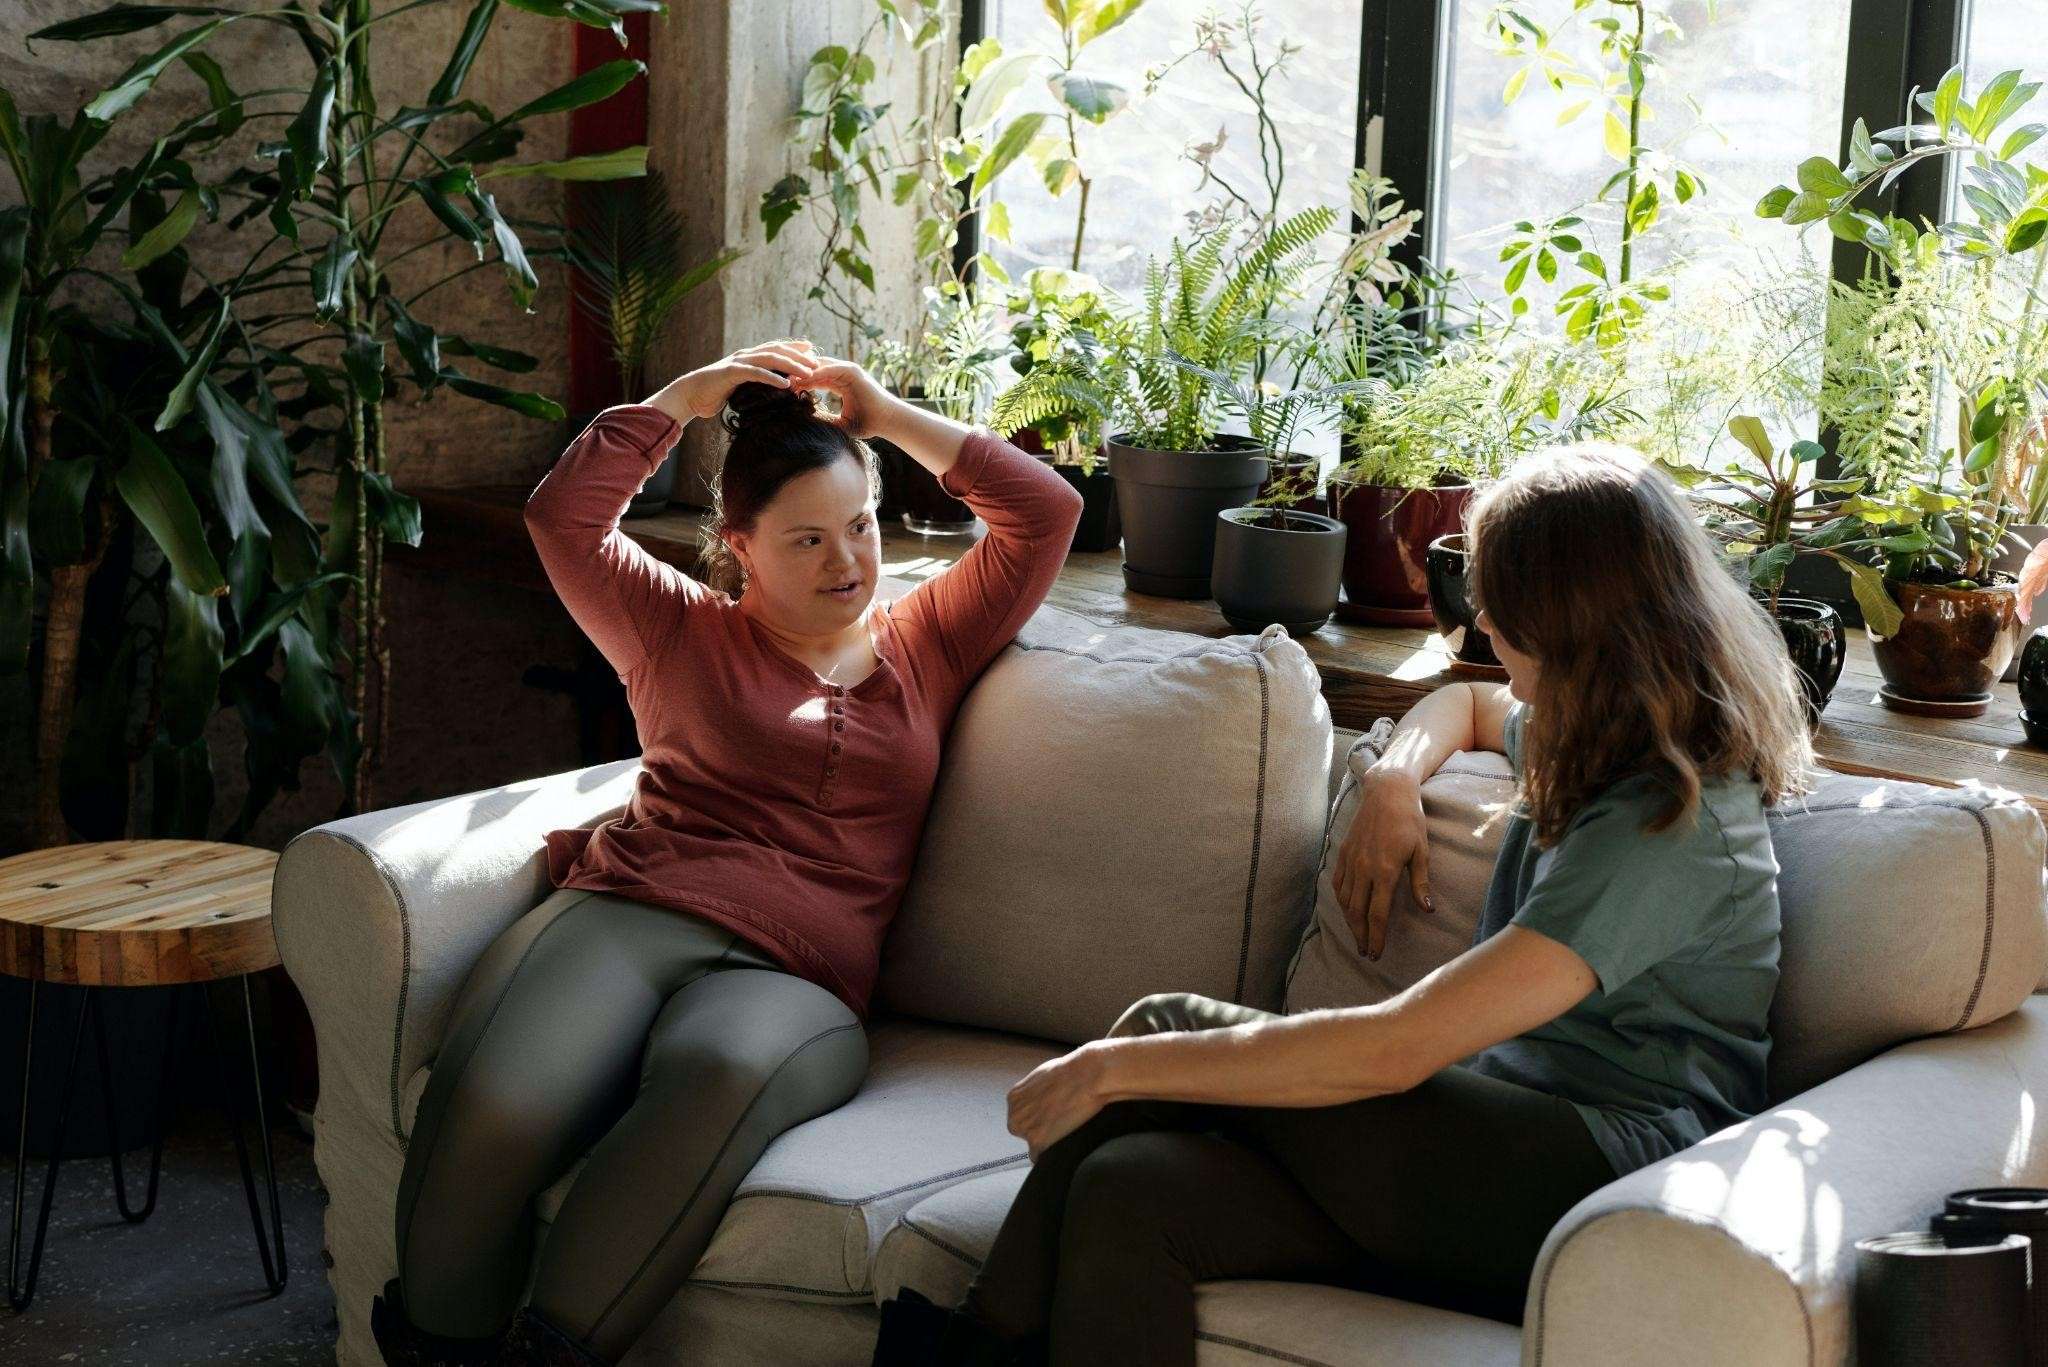 Two women have a conversation on a couch surrounded by plants.